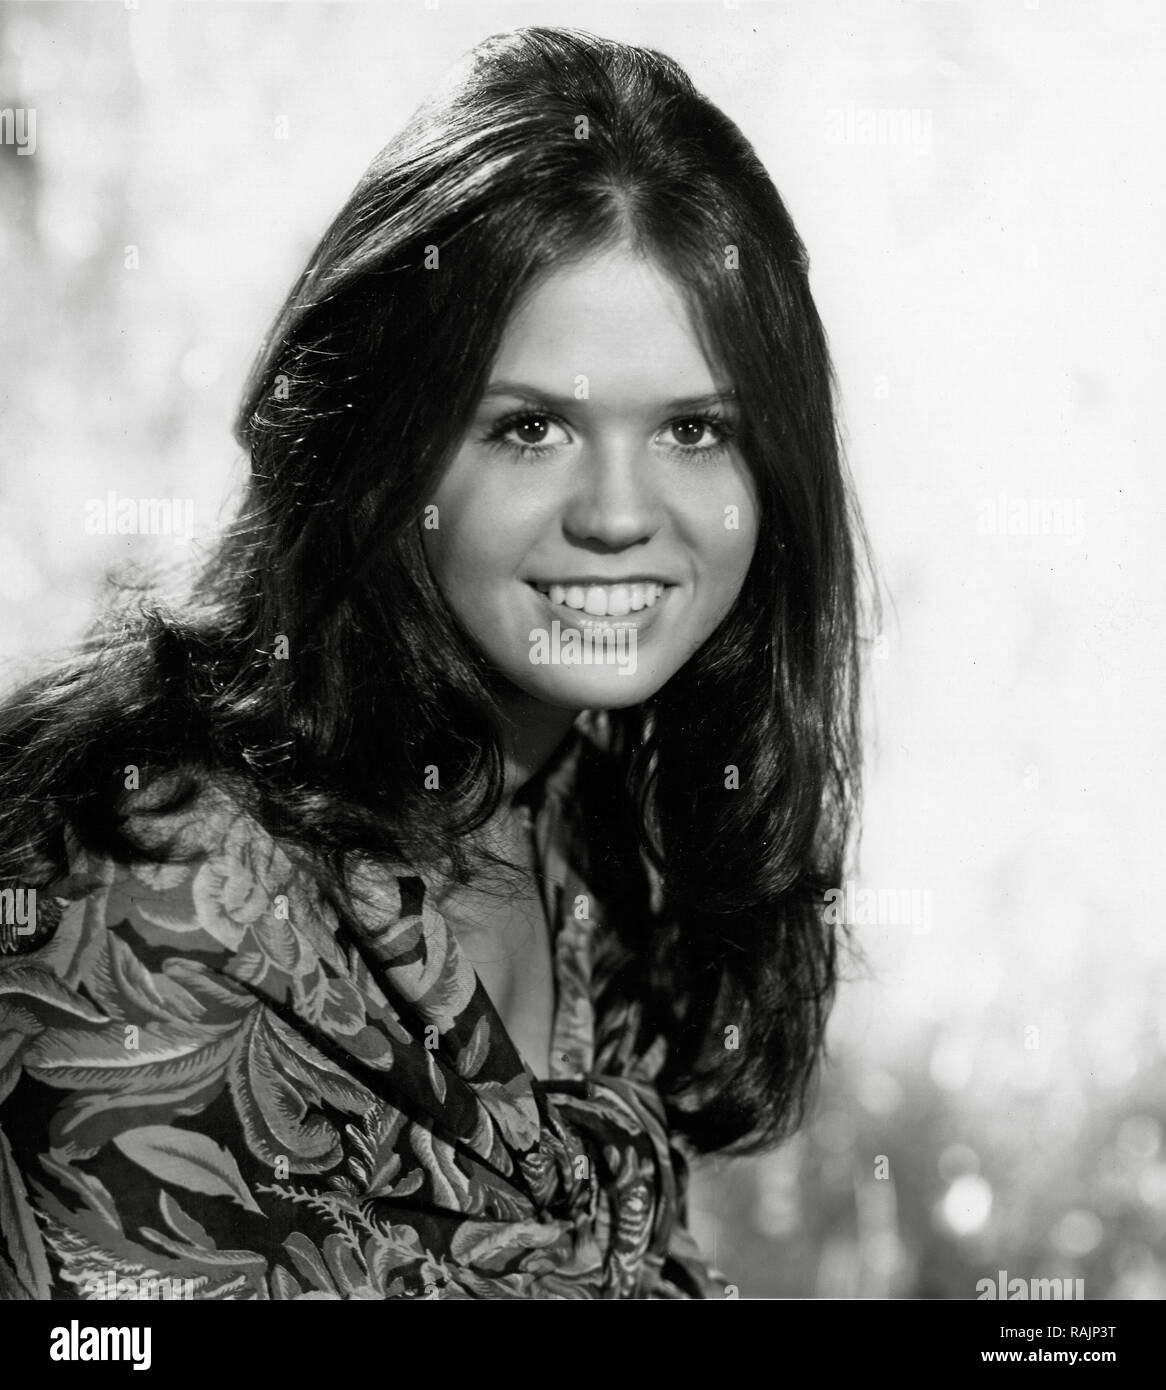 Publicity photo of Marie Osmond, circa 1975 File Reference # 33636 ...